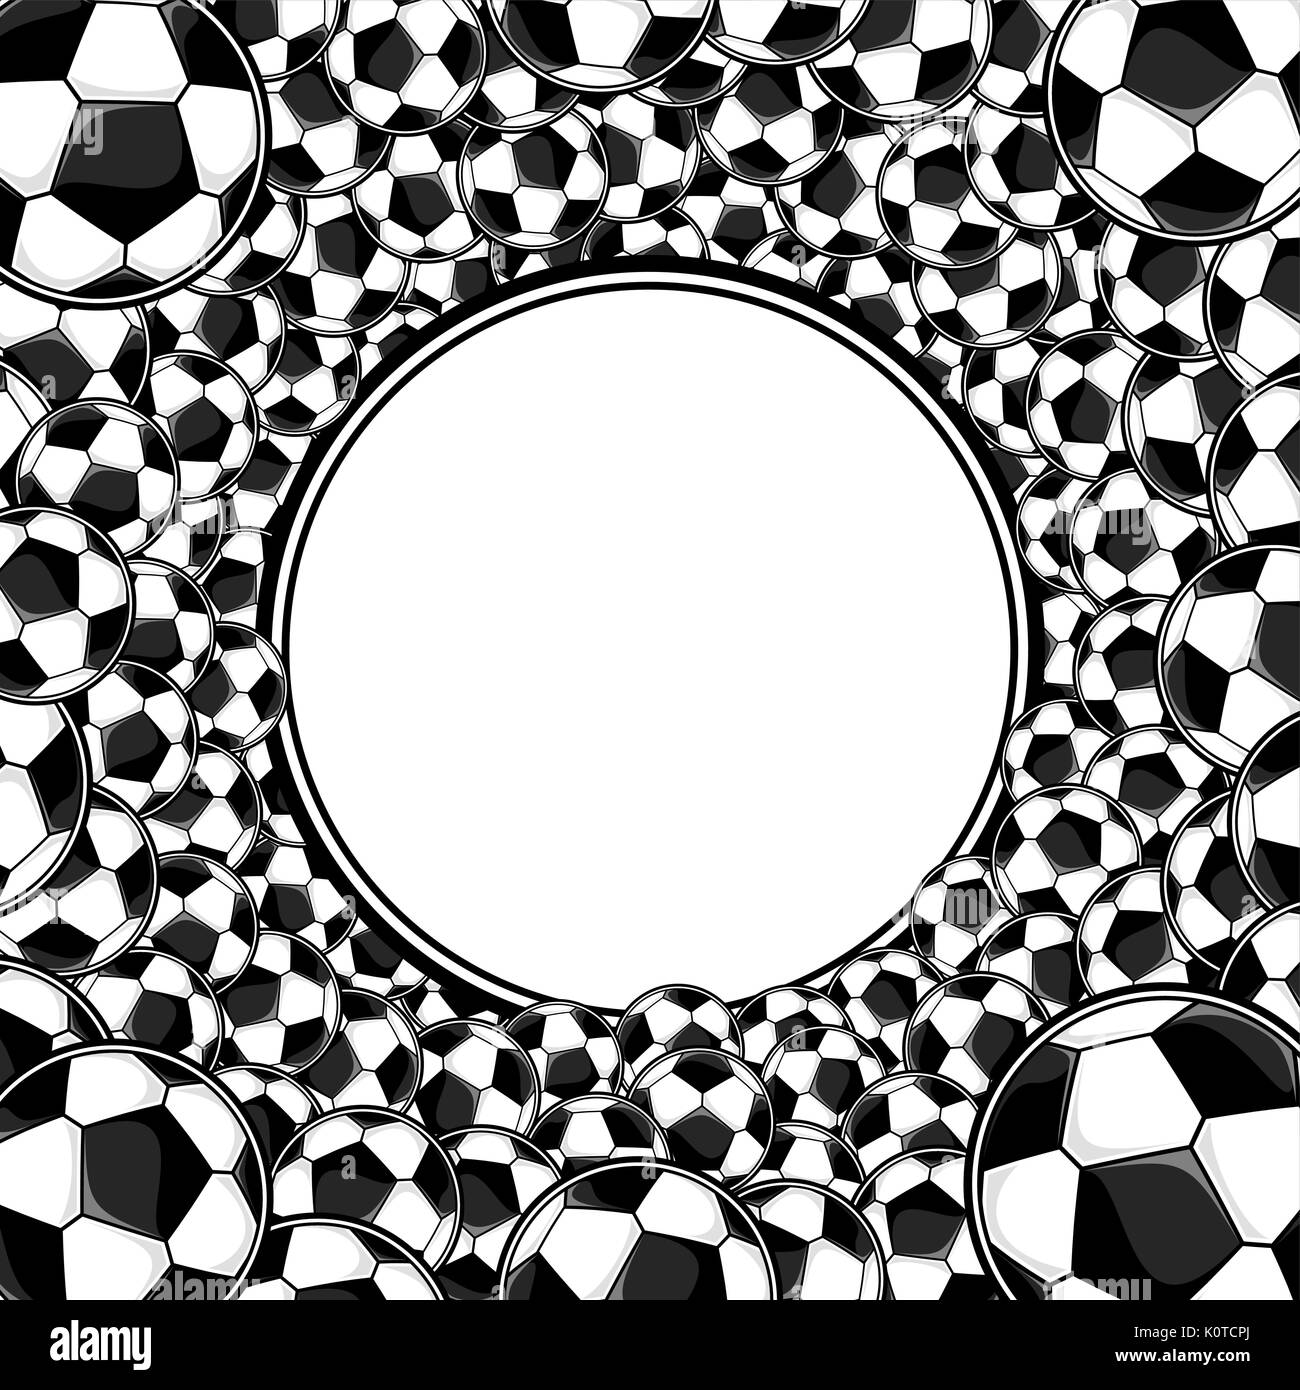 soccer balls circle framed background with copy space Stock Vector